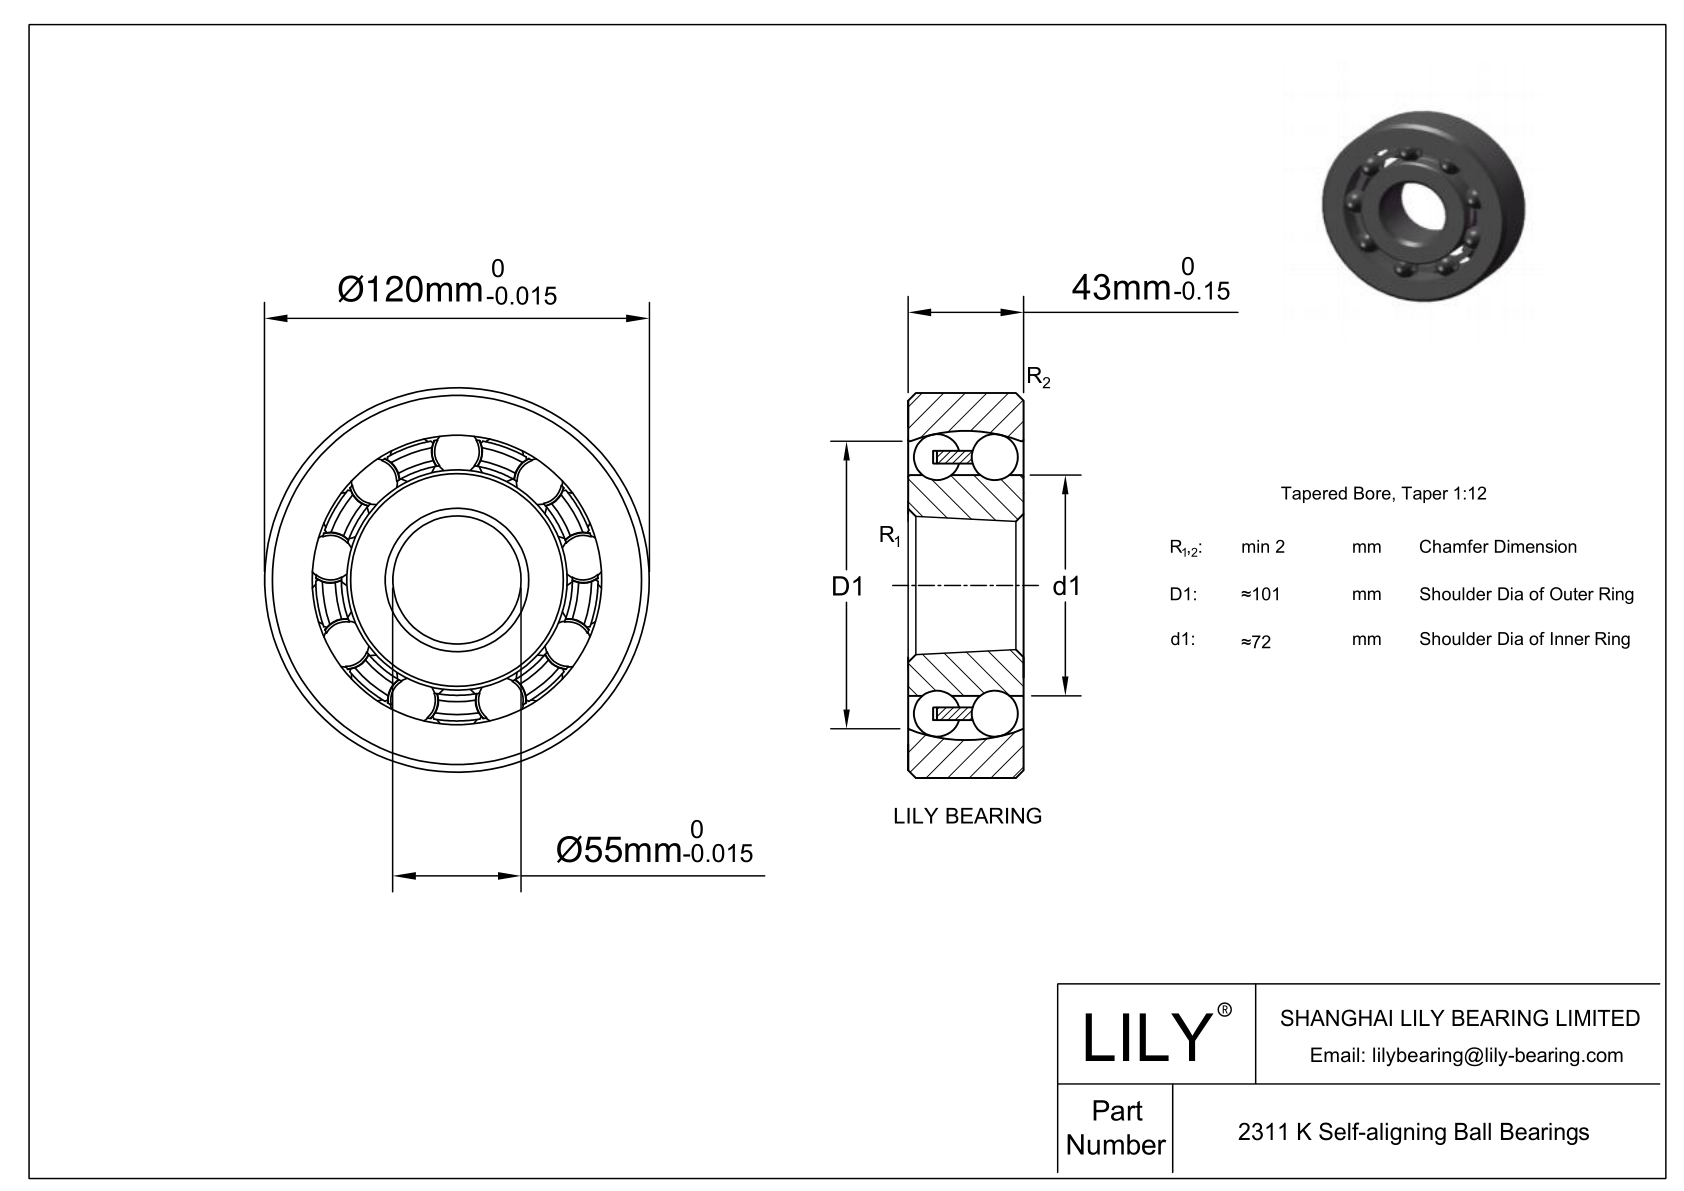 S2311 K Stainless Steel Self Aligning Ball Bearings cad drawing